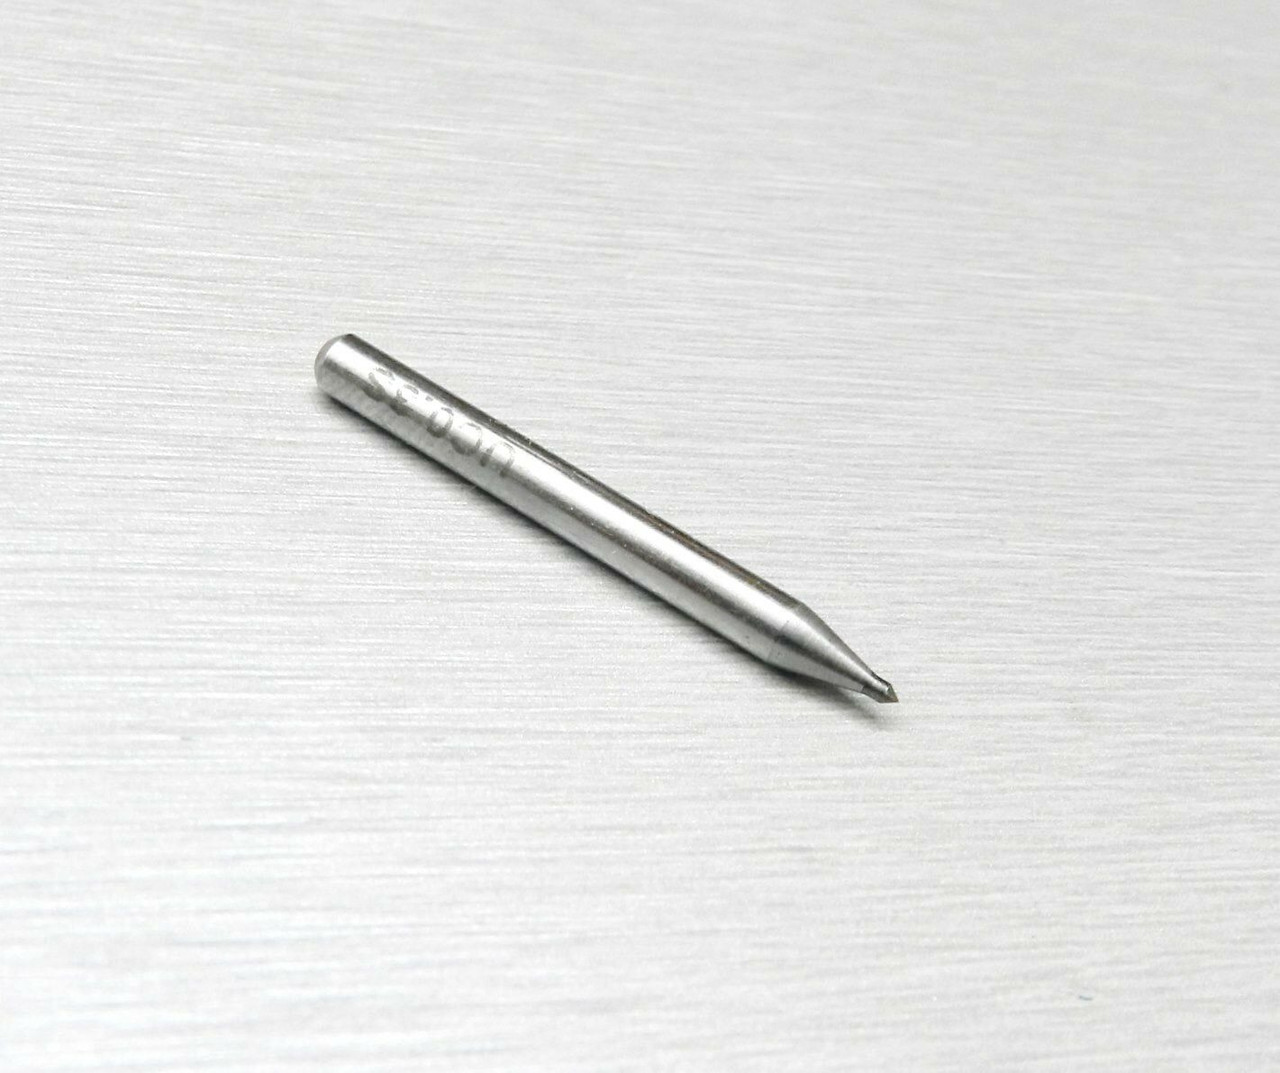 Tungsten Carbide Tip Replacement for Scribe Marking Etching Scriber Pen  General